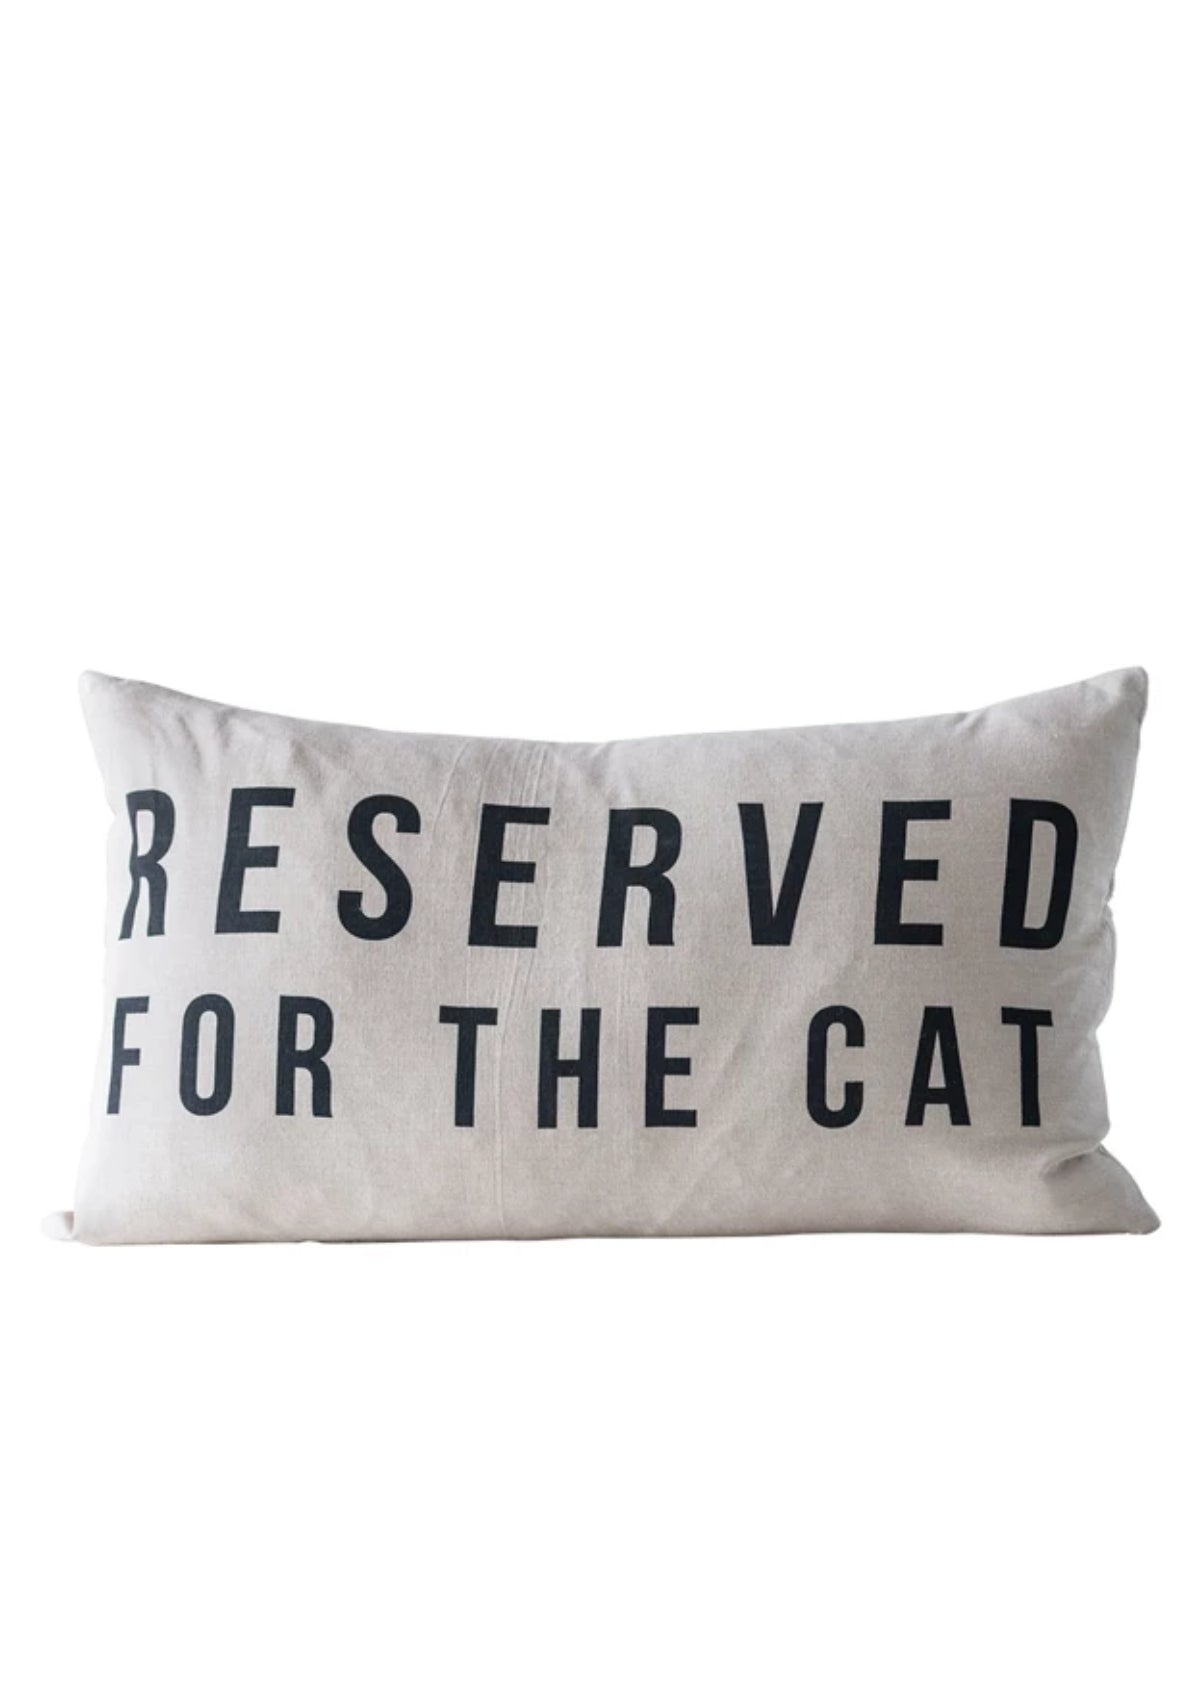 Reserved for the Cat Cotton Lumbar Pillow -Creative Co-op- Ruby Jane-